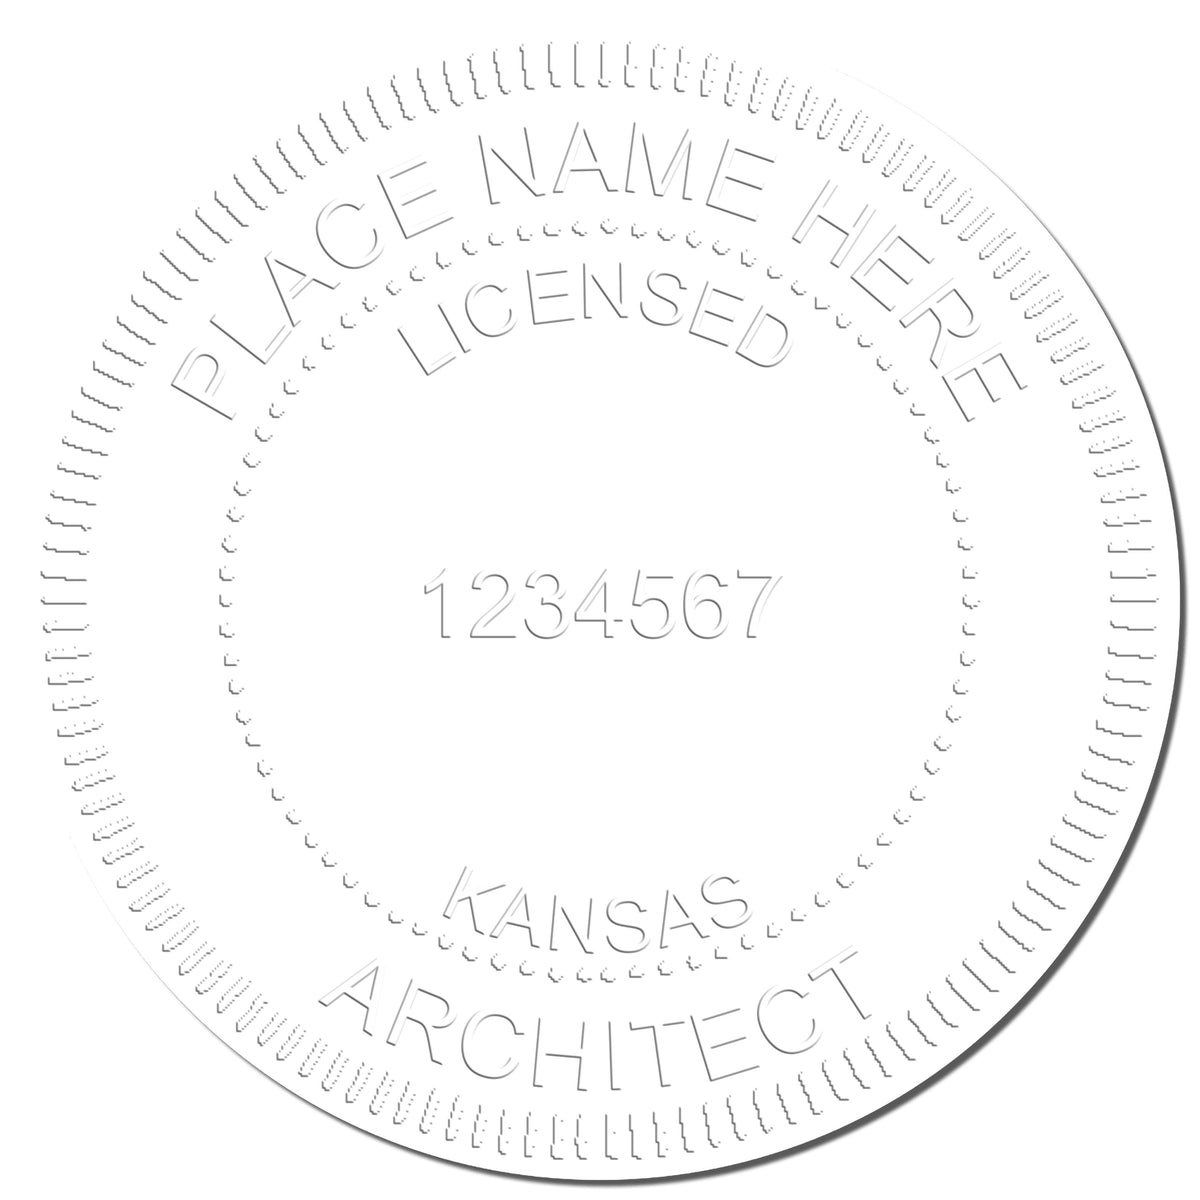 A photograph of the Extended Long Reach Kansas Architect Seal Embosser stamp impression reveals a vivid, professional image of the on paper.